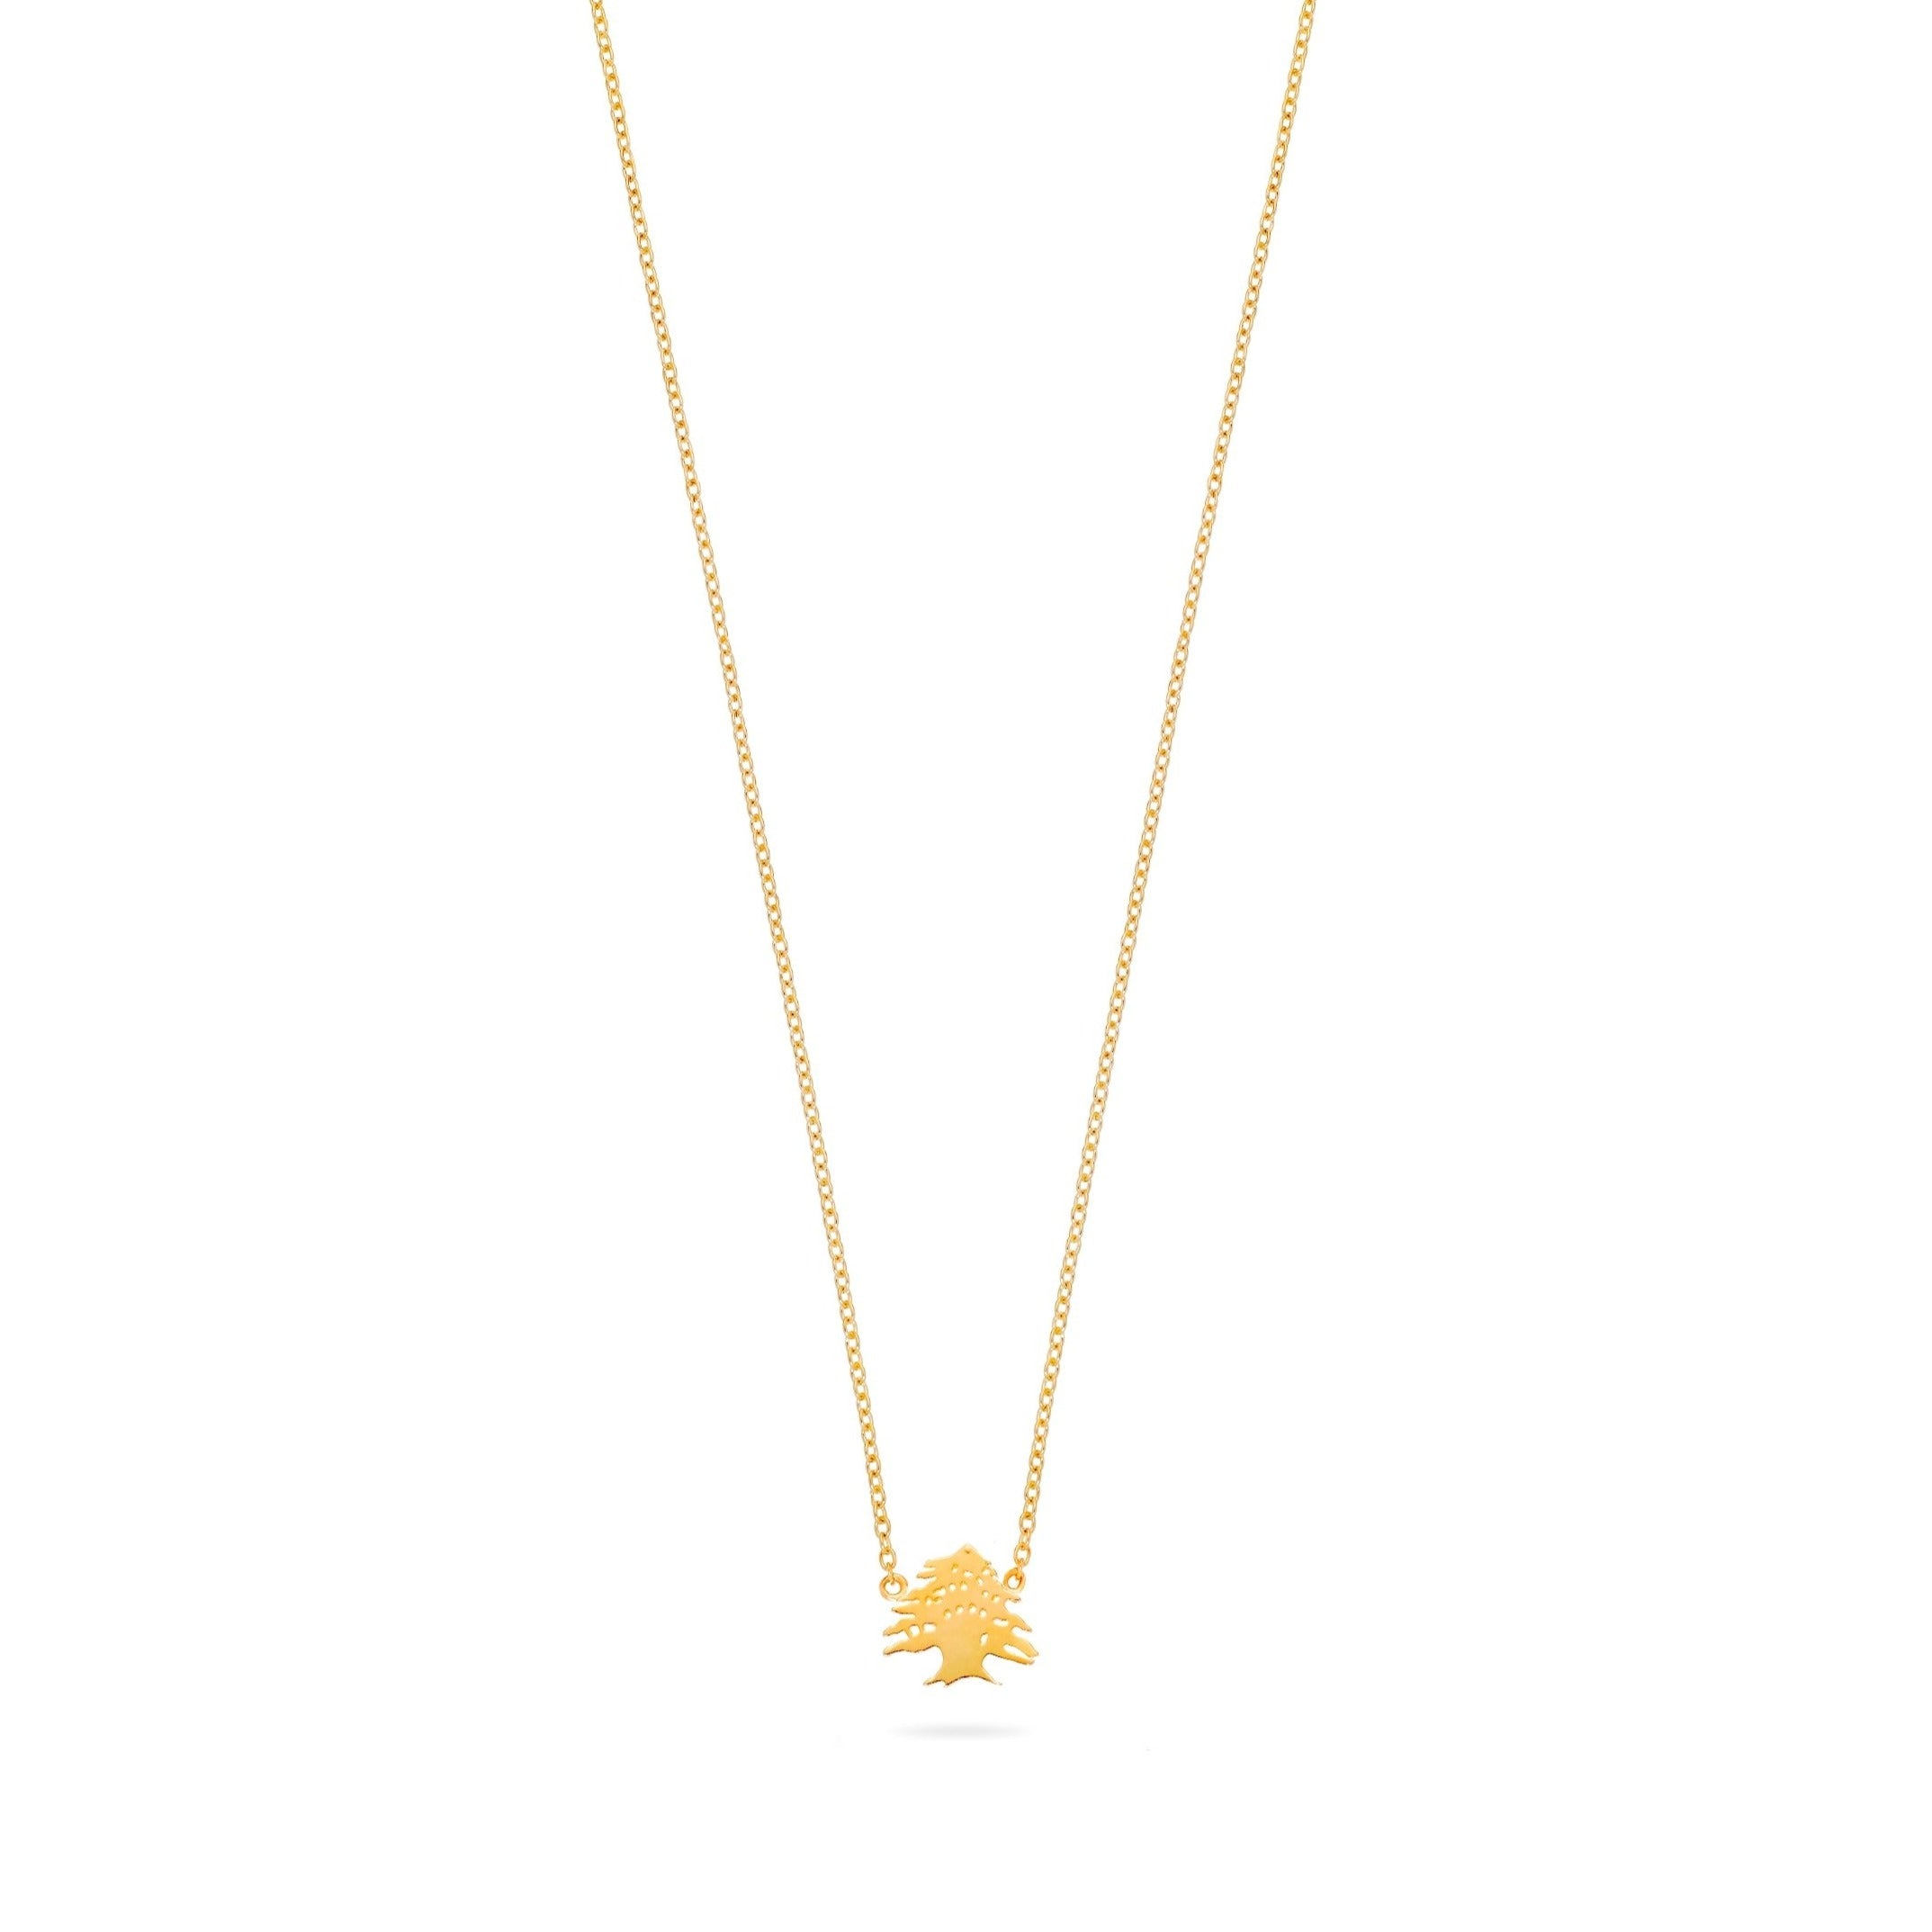 Ceder Tree Gold Necklace Small